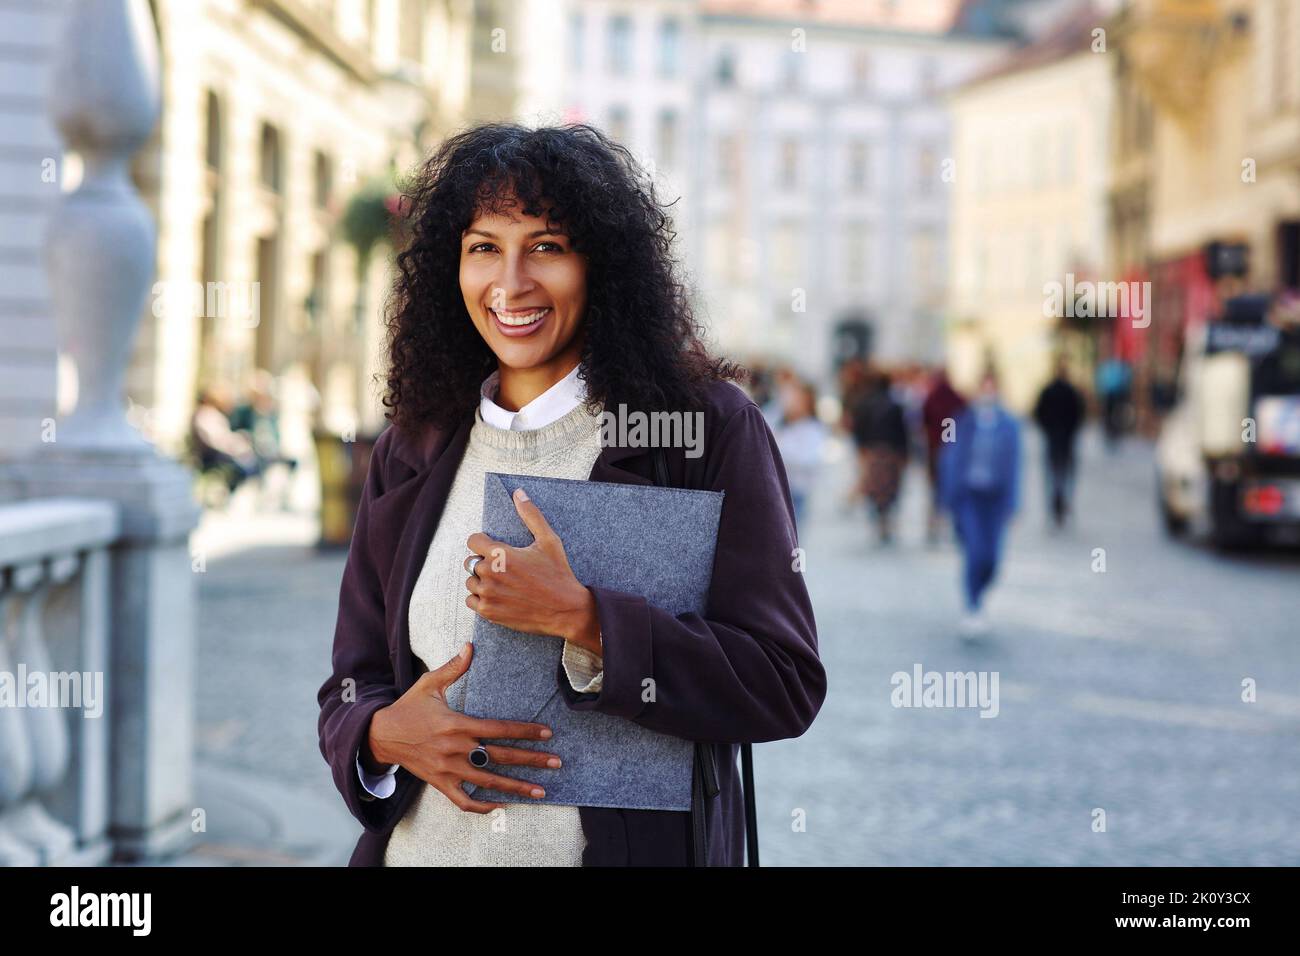 positive businesswoman standing on street holding folder with documents curly black hair Stock Photo